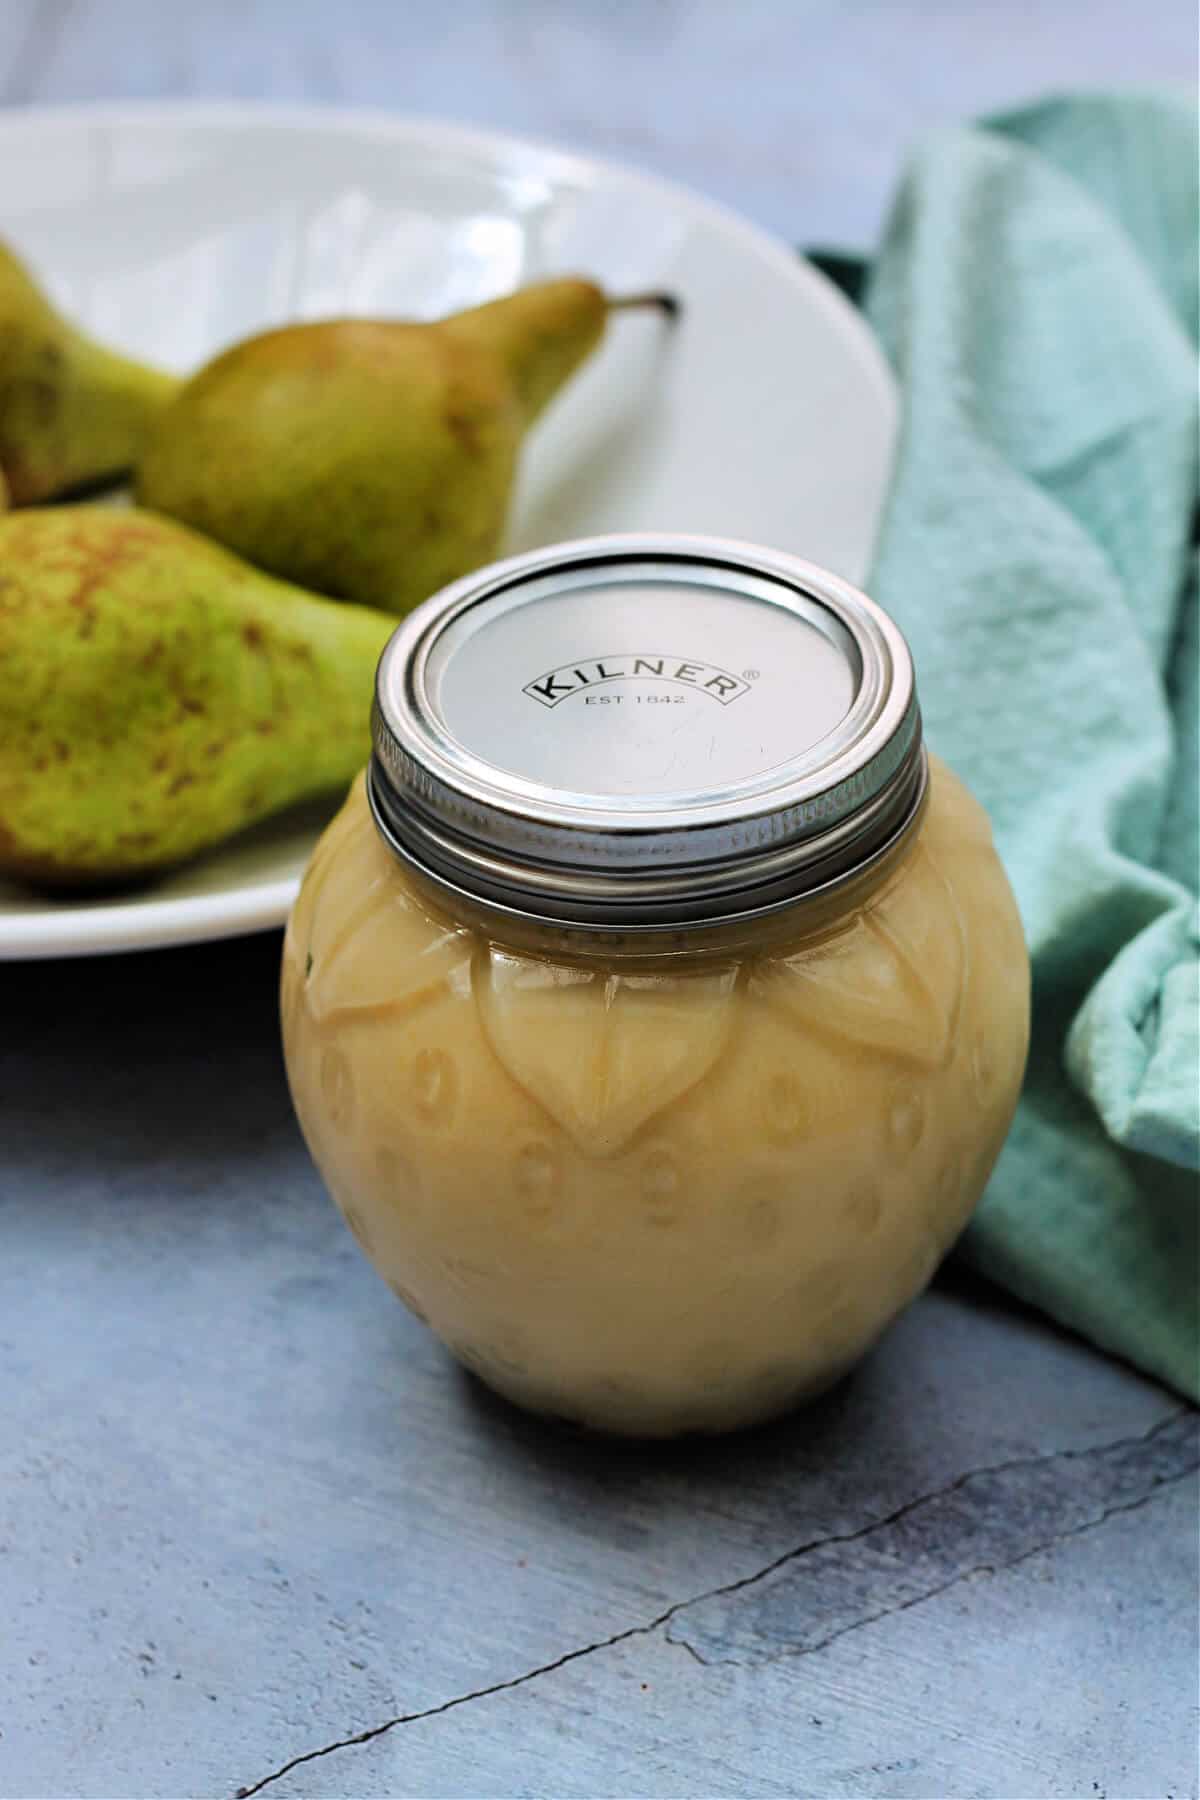 Jar of pear curd in front of a white bowl of pears.